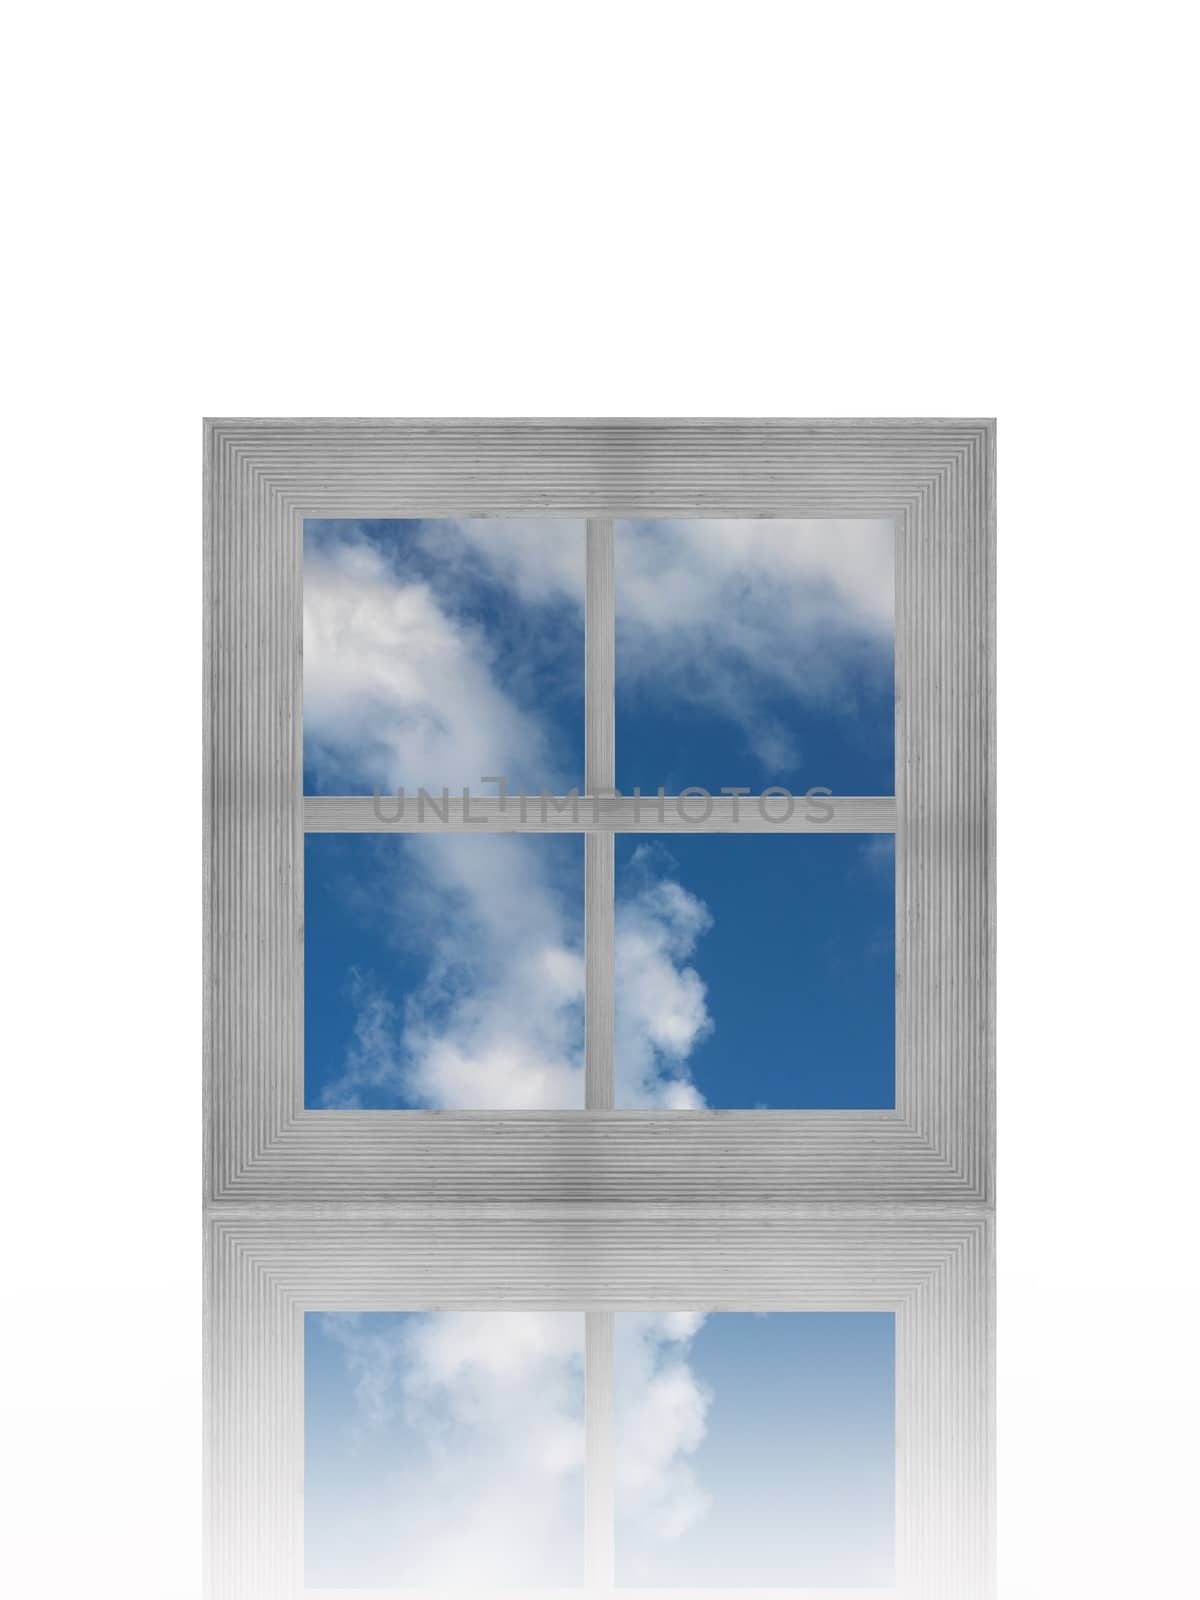 A conceptual image of a window with a view